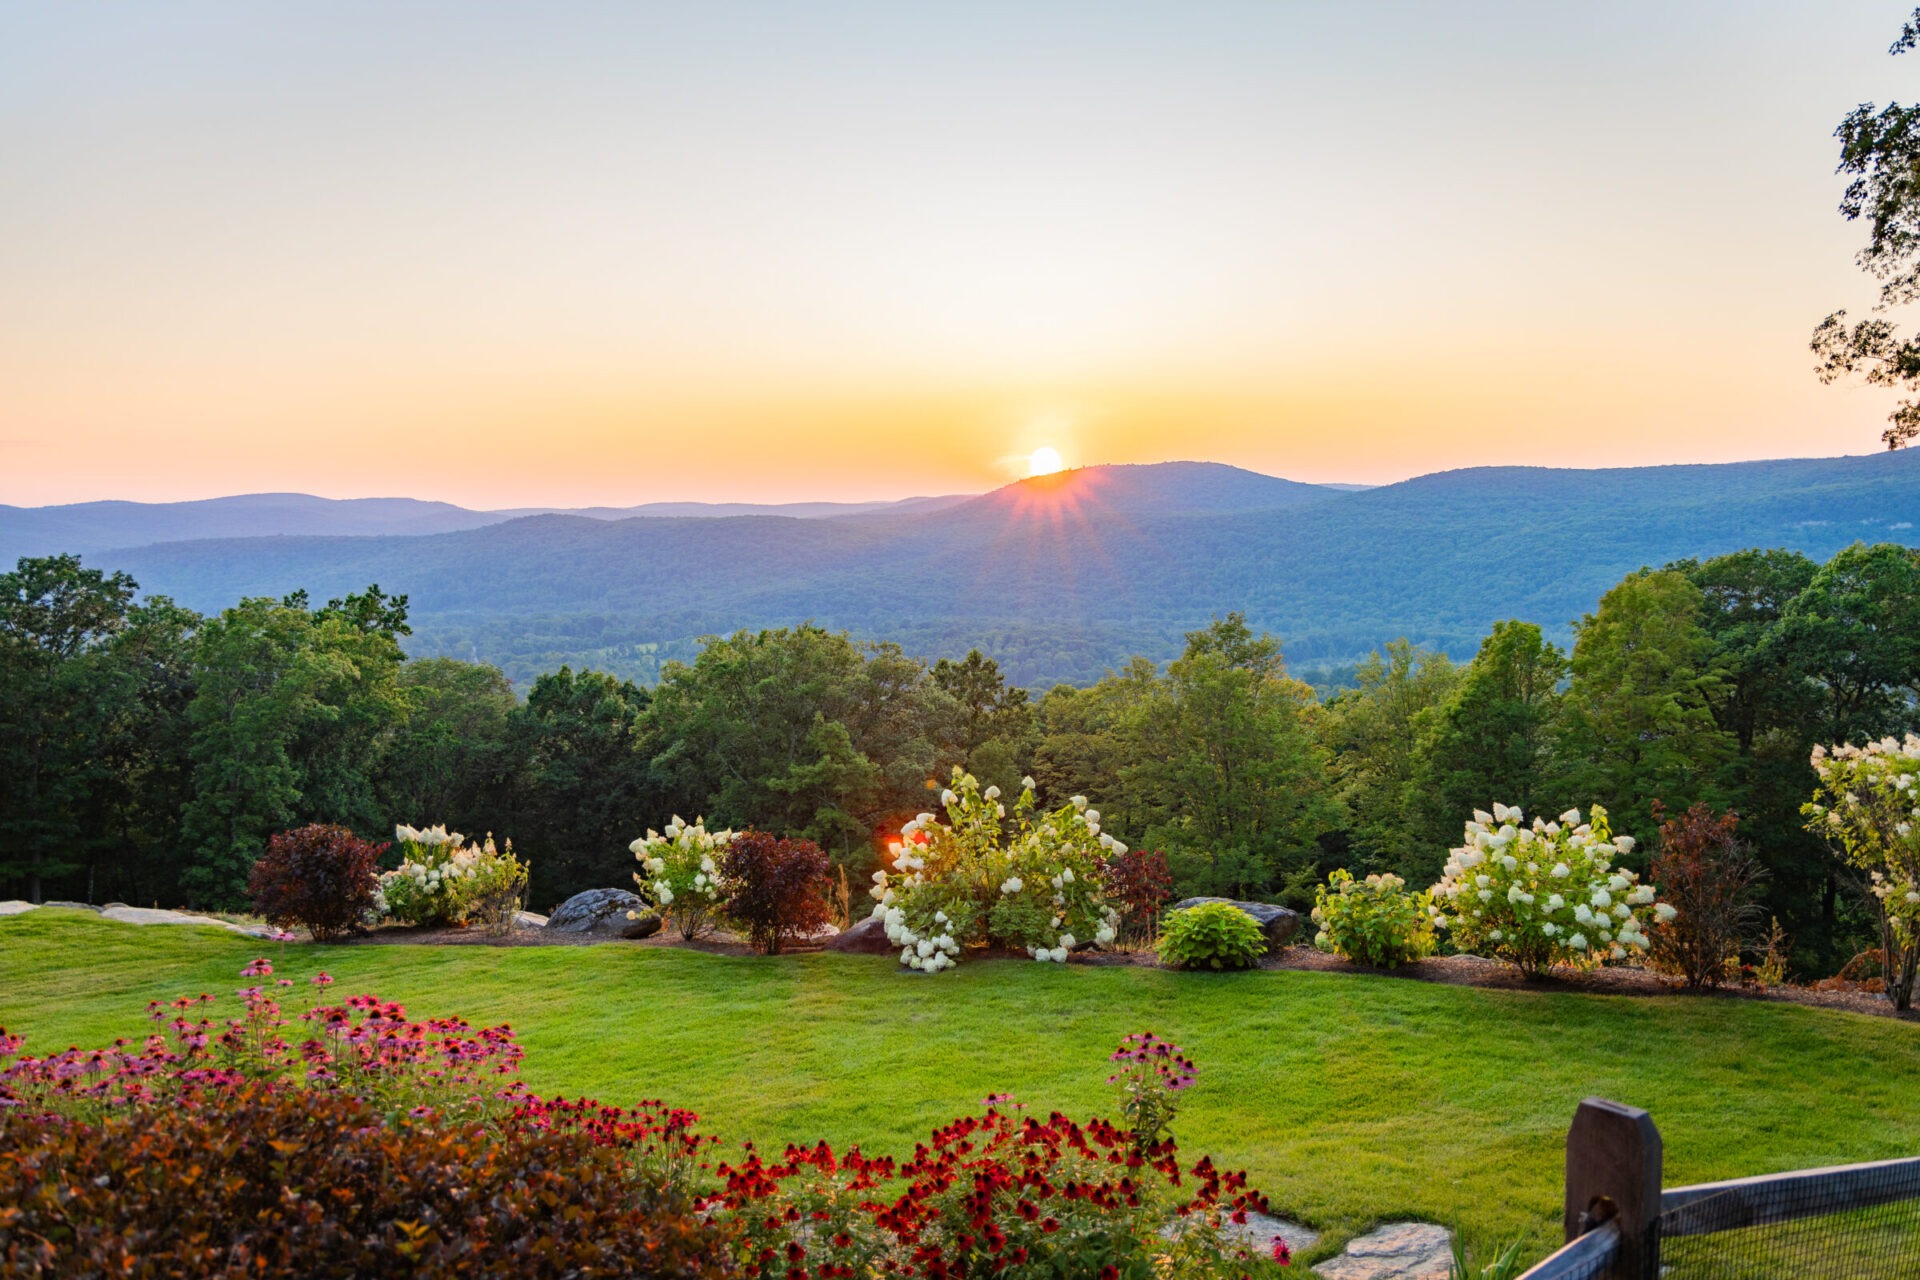 A tranquil sunset over rolling hills, viewed from a lush garden adorned with colorful flowers and shrubs, under a softly gradient sky.